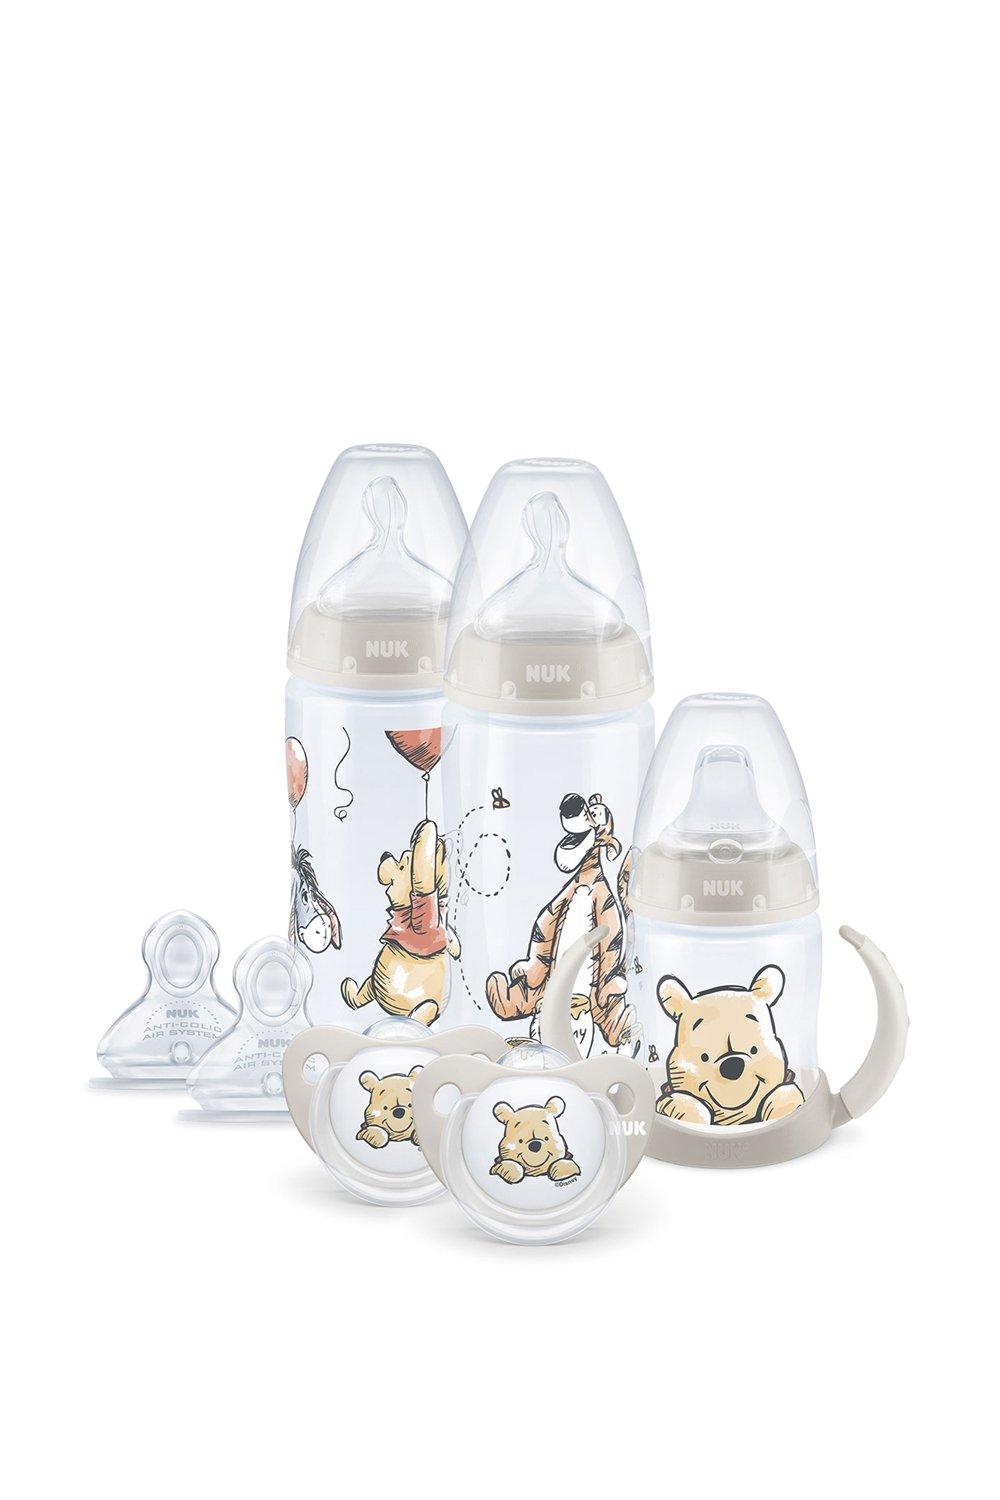 Nuk Winnie The Pooh Feeding Bottles, Teats, Soother And Cup Set 6-18M|